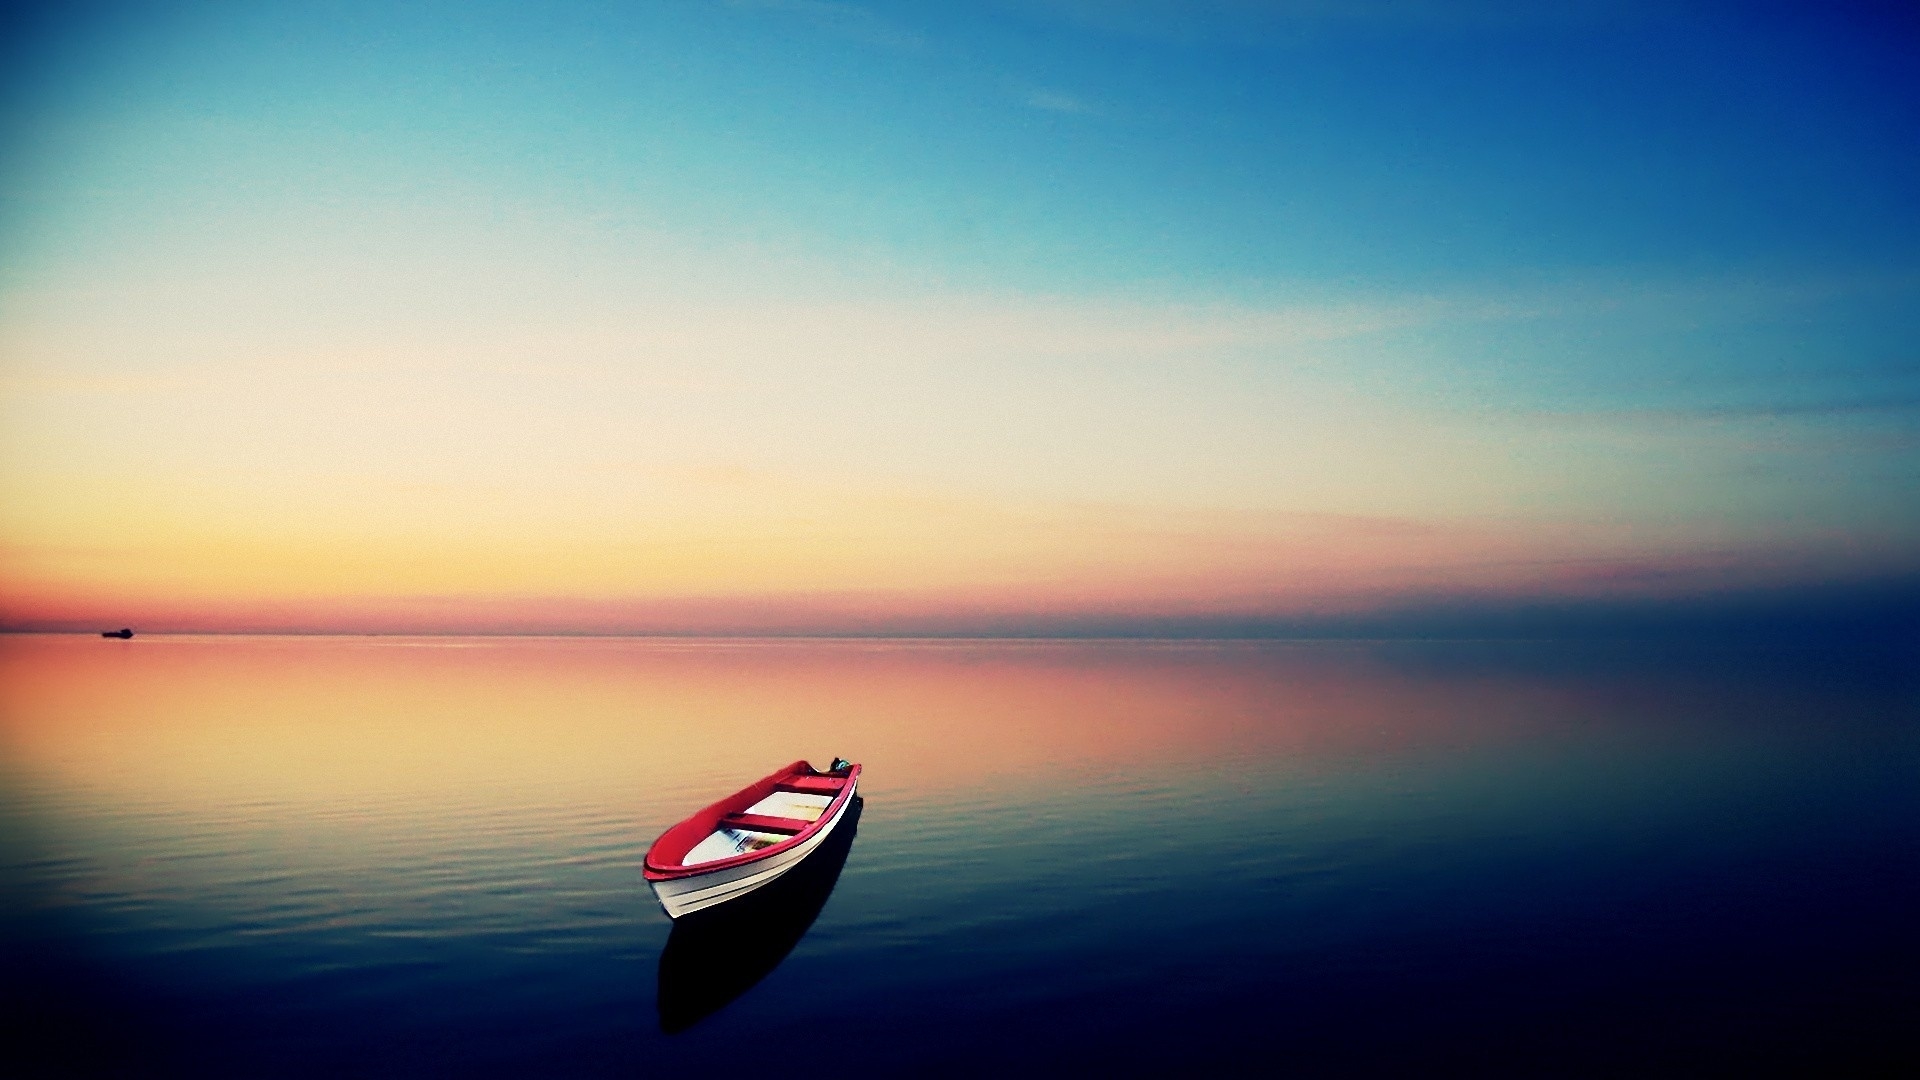 Boat Alone Wallpapers #6935880